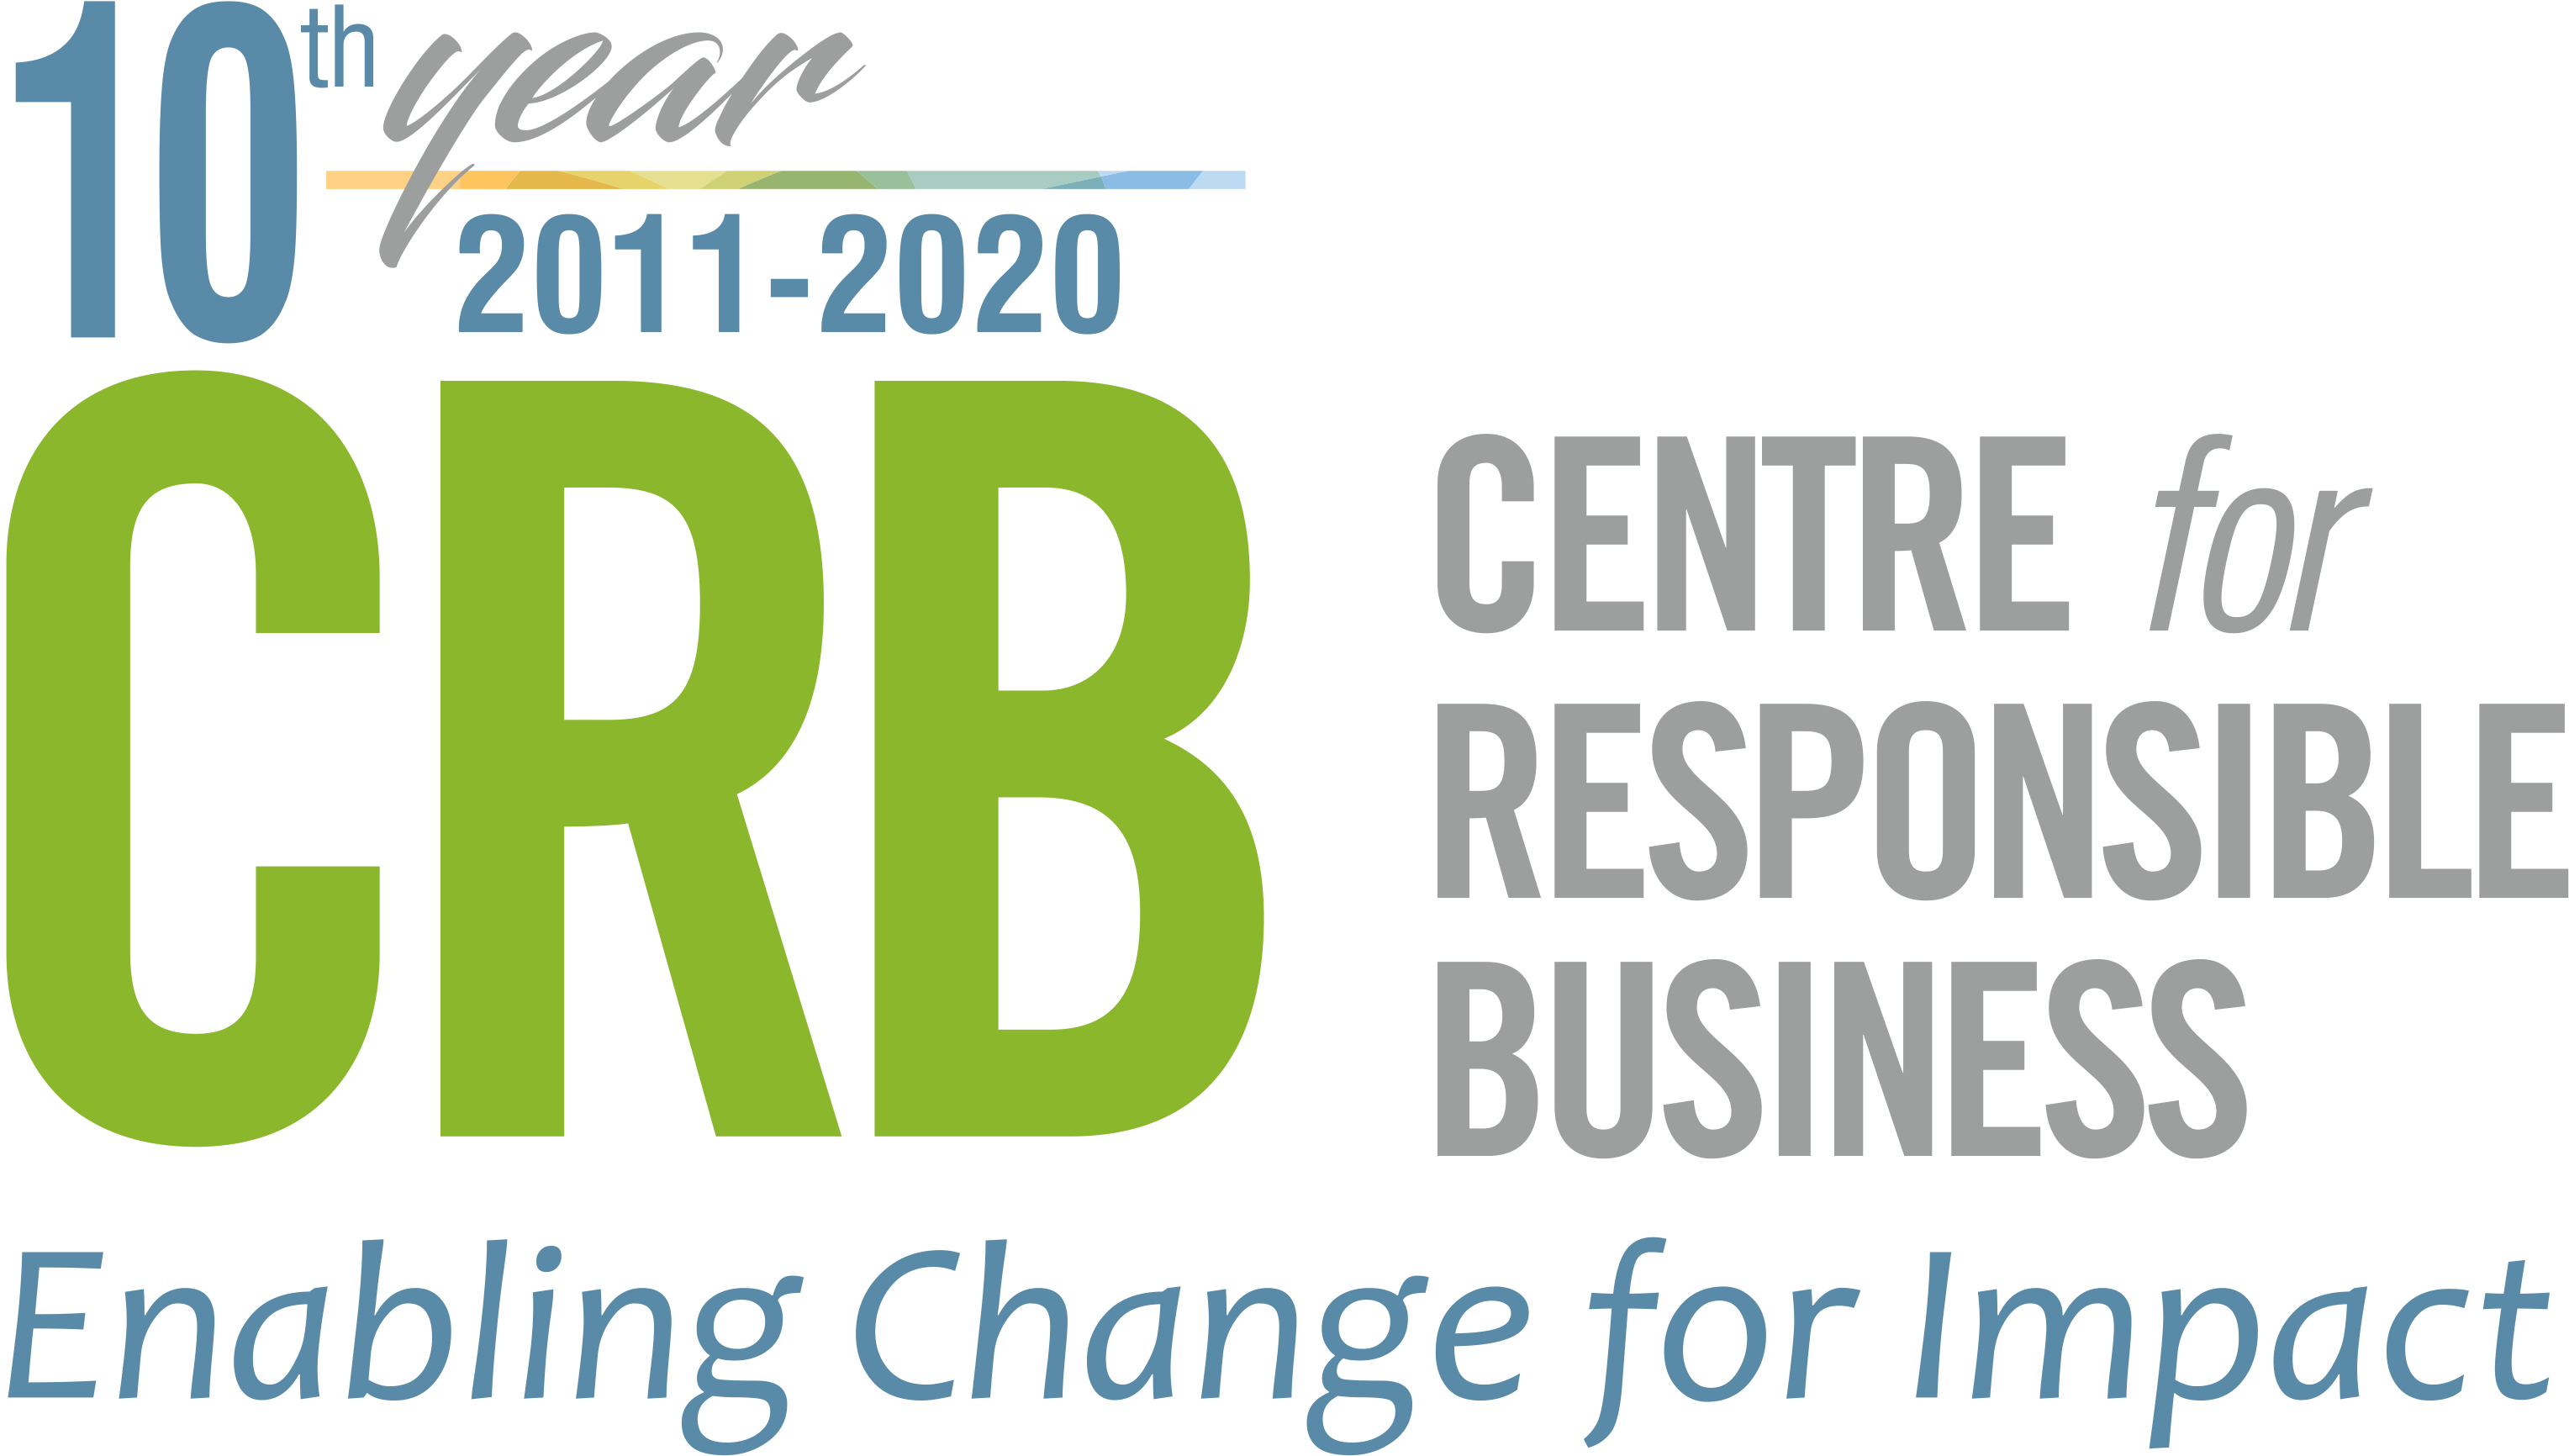 Centre for Responsible Business logo